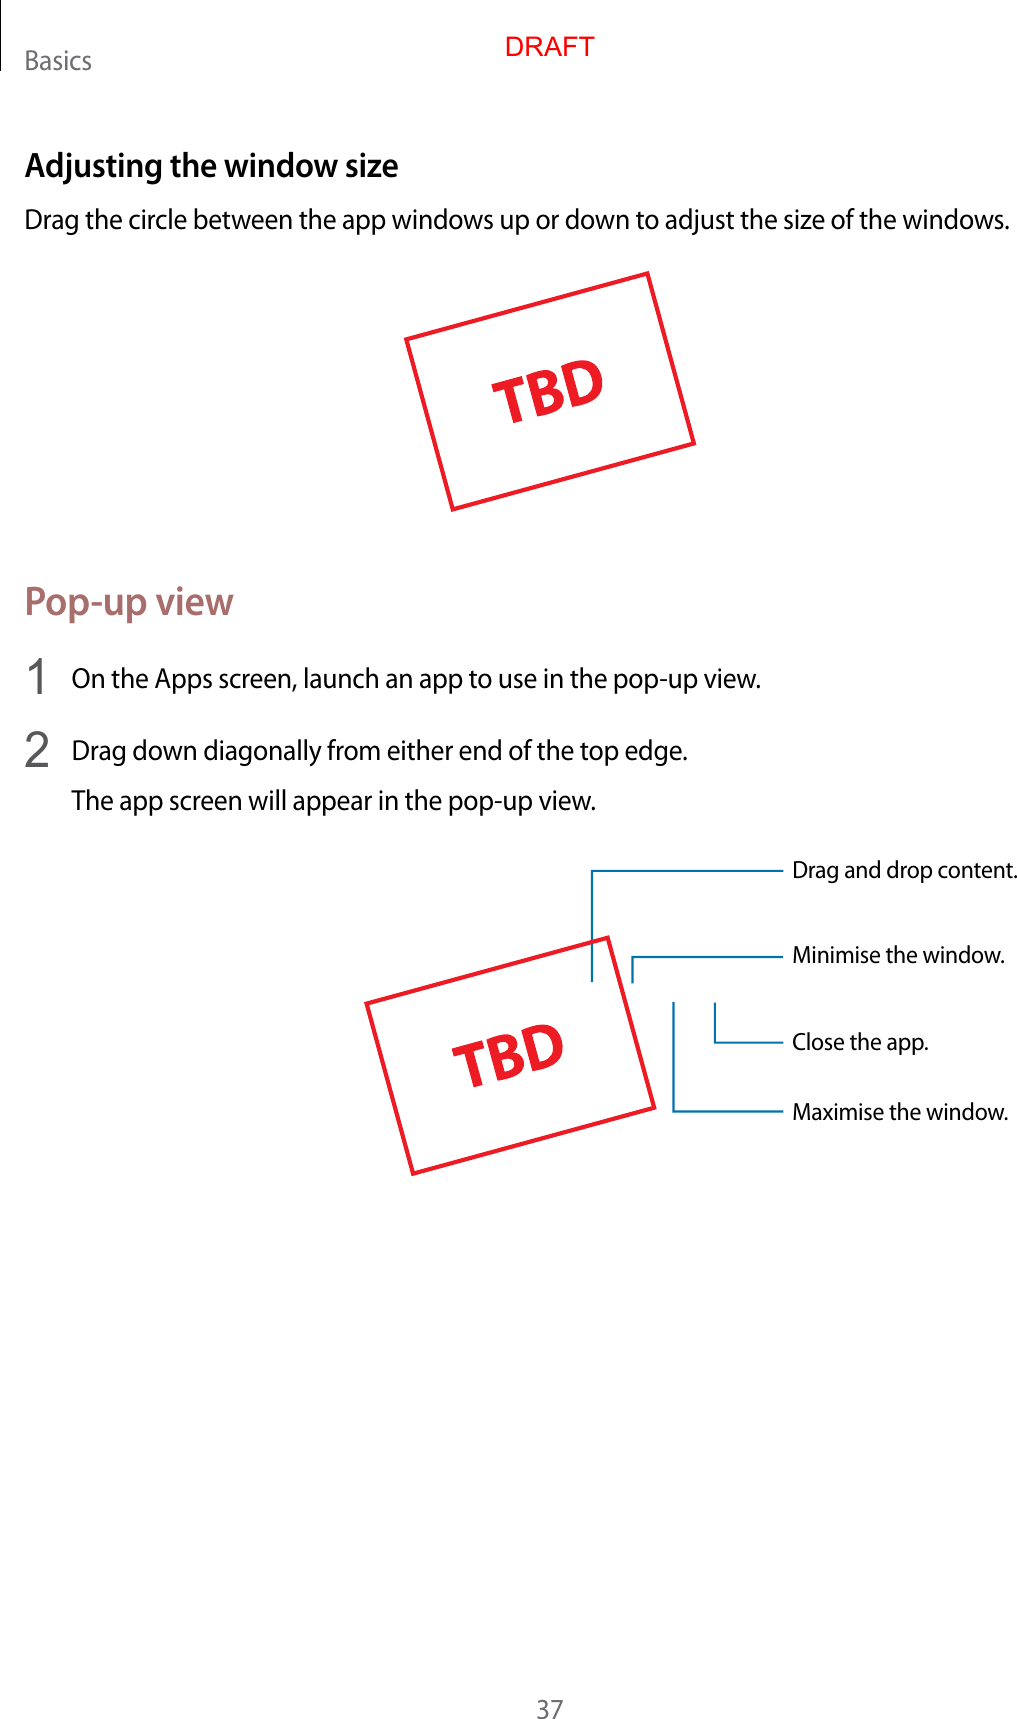 Basics37Adjusting the windo w siz eDrag the circle between the app windo w s up or down t o adjust the siz e of the window s .Pop-up view1  On the Apps screen, launch an app t o use in the pop-up view.2  Drag down diagonally fr om either end of the t op edge .The app screen will appear in the pop-up view.Minimise the window.Close the app .Maximise the window.Drag and drop c ont ent.DRAFT